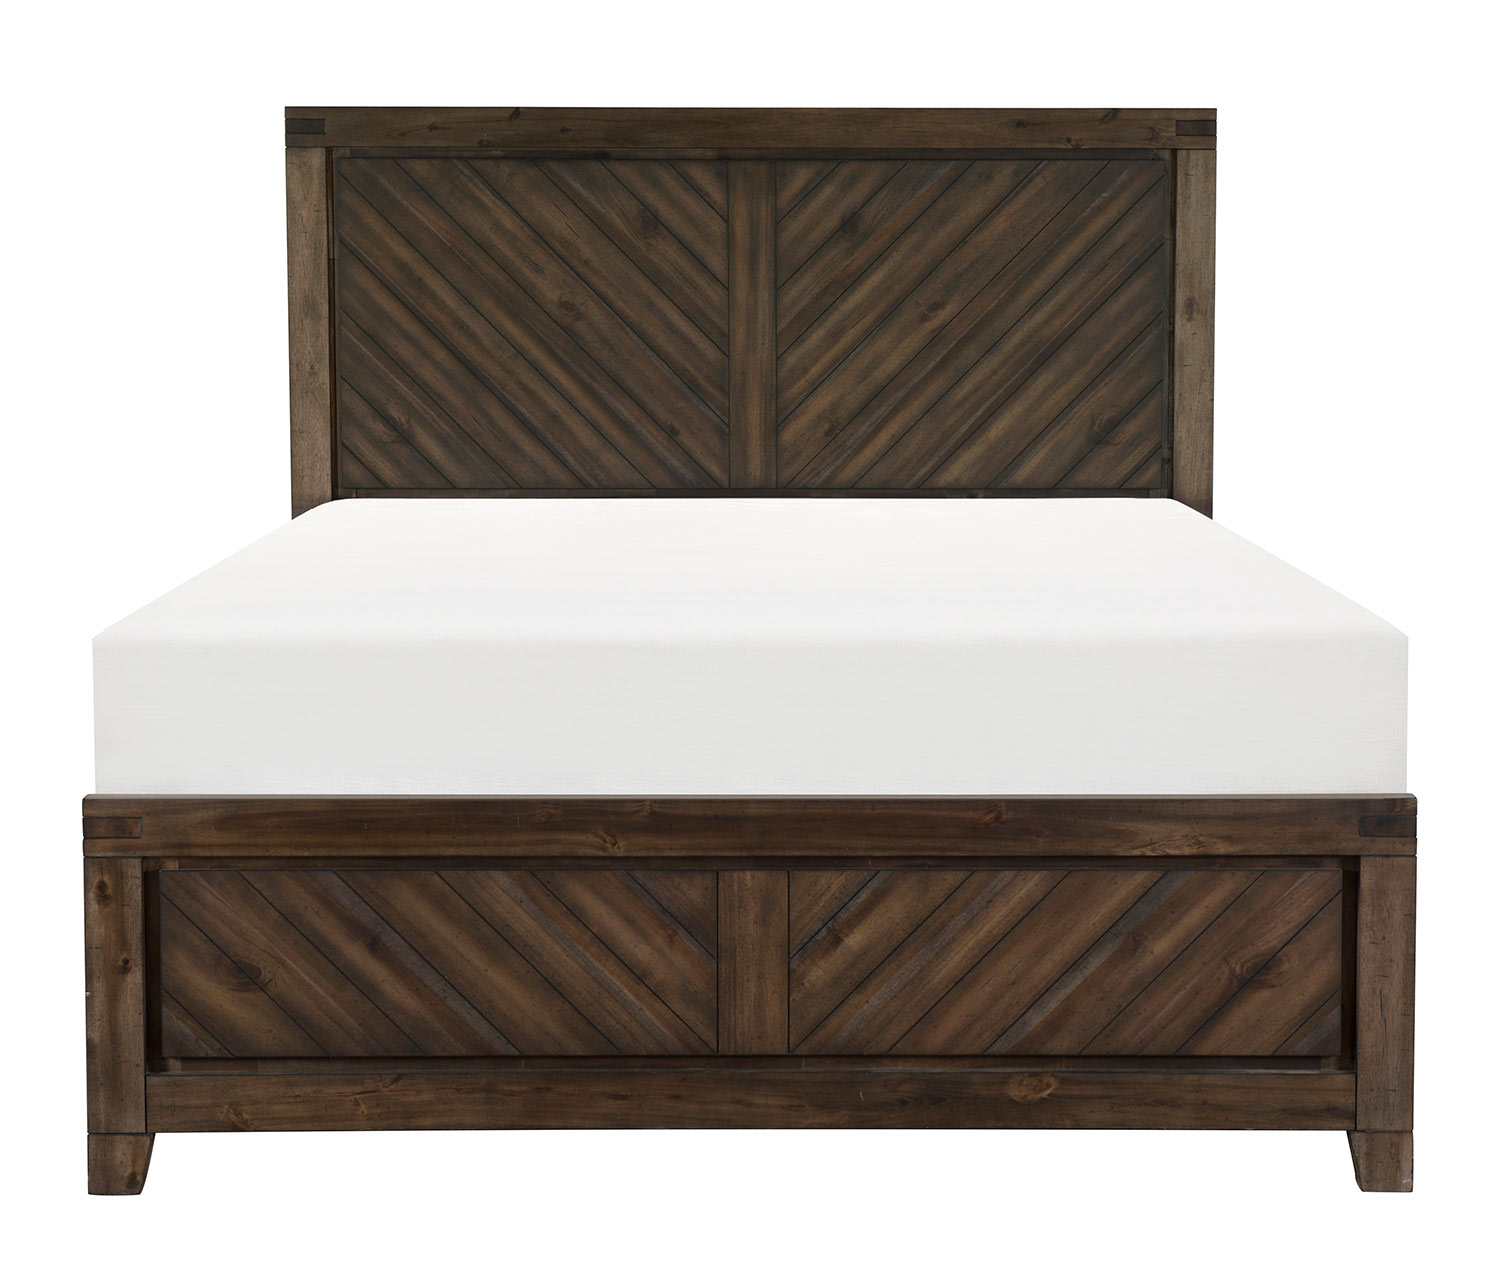 Homelegance Parnell Bed - Rustic Cherry